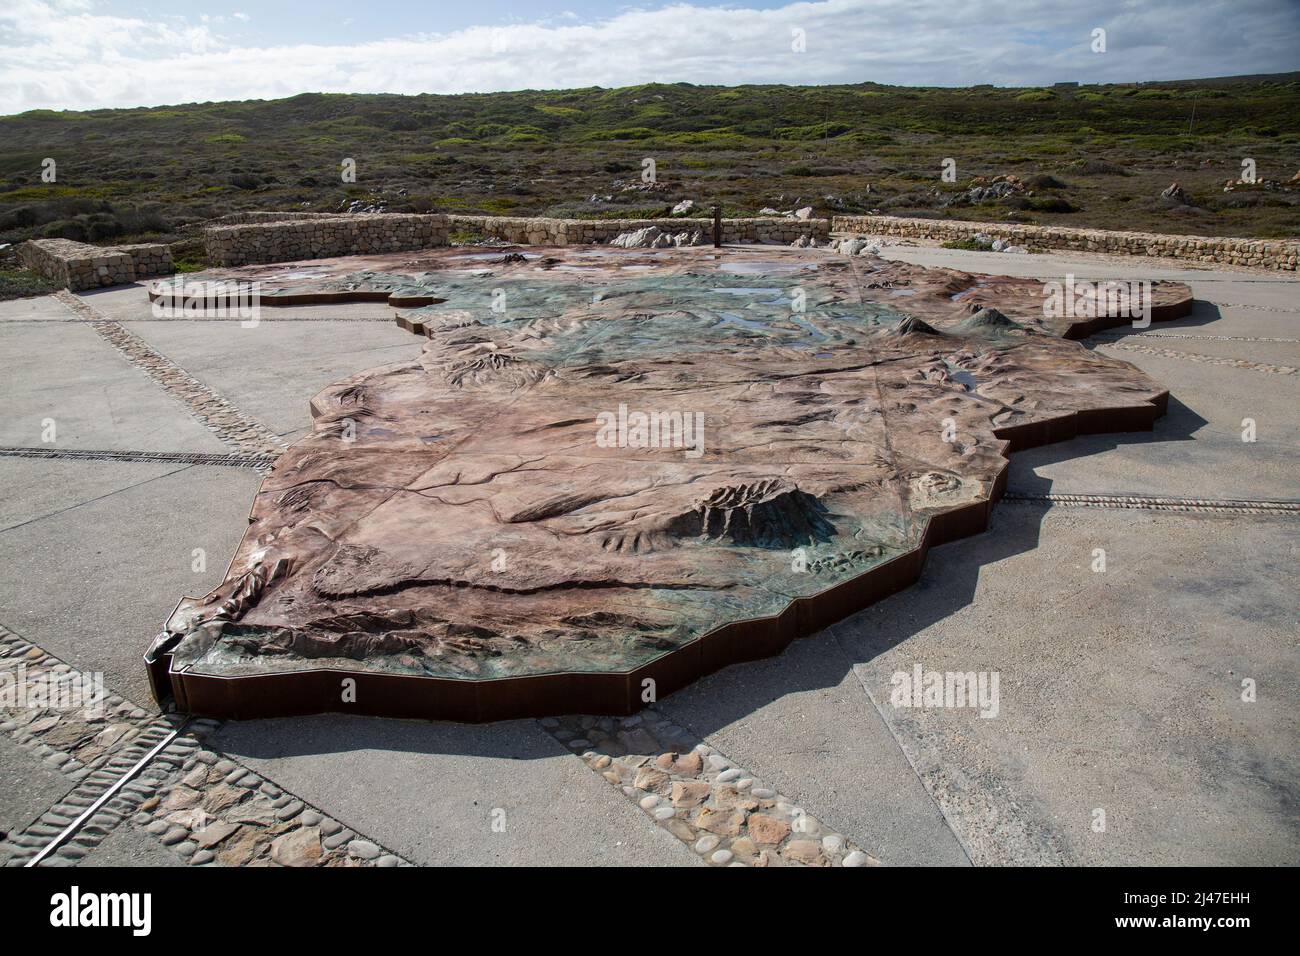 The Map Of Africa Monument at Cape Agulhas in South Africa. Stock Photo